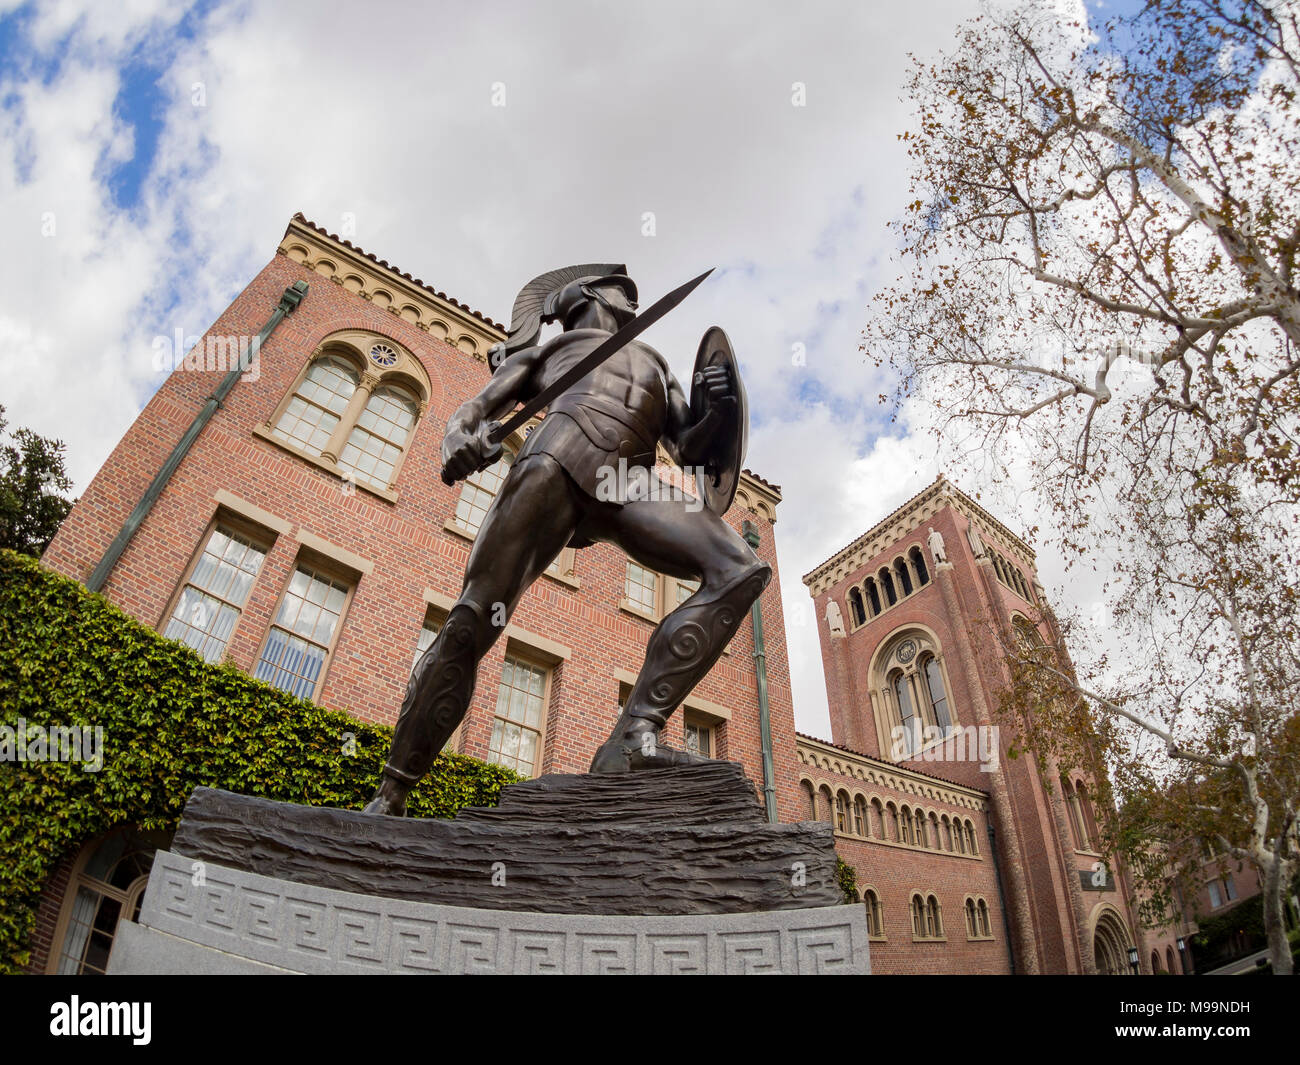 Los Angeles, MAR 16: Exterior view of the beautiful Tommy Trojan and Bovard Aministration buiding in USC on MAR 16, 2018 at Los Angeles, California Stock Photo